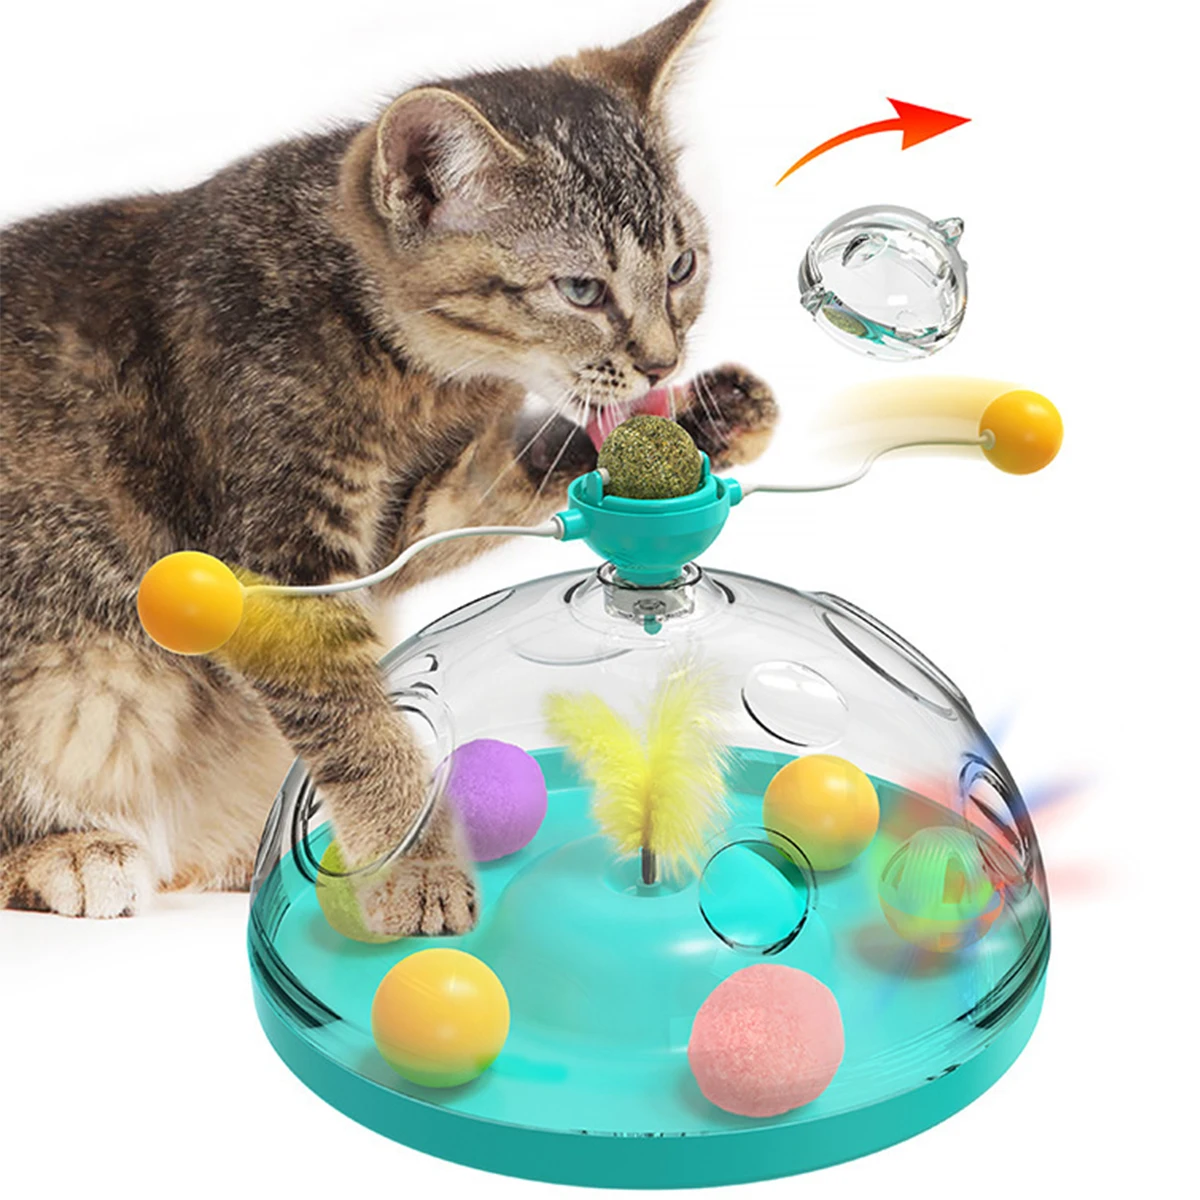 

Funny Cat Windmill Toys Interesting Turntable for Kitten Pets Interactive Educational Toy with Luminous Ball Catnip Cat Product